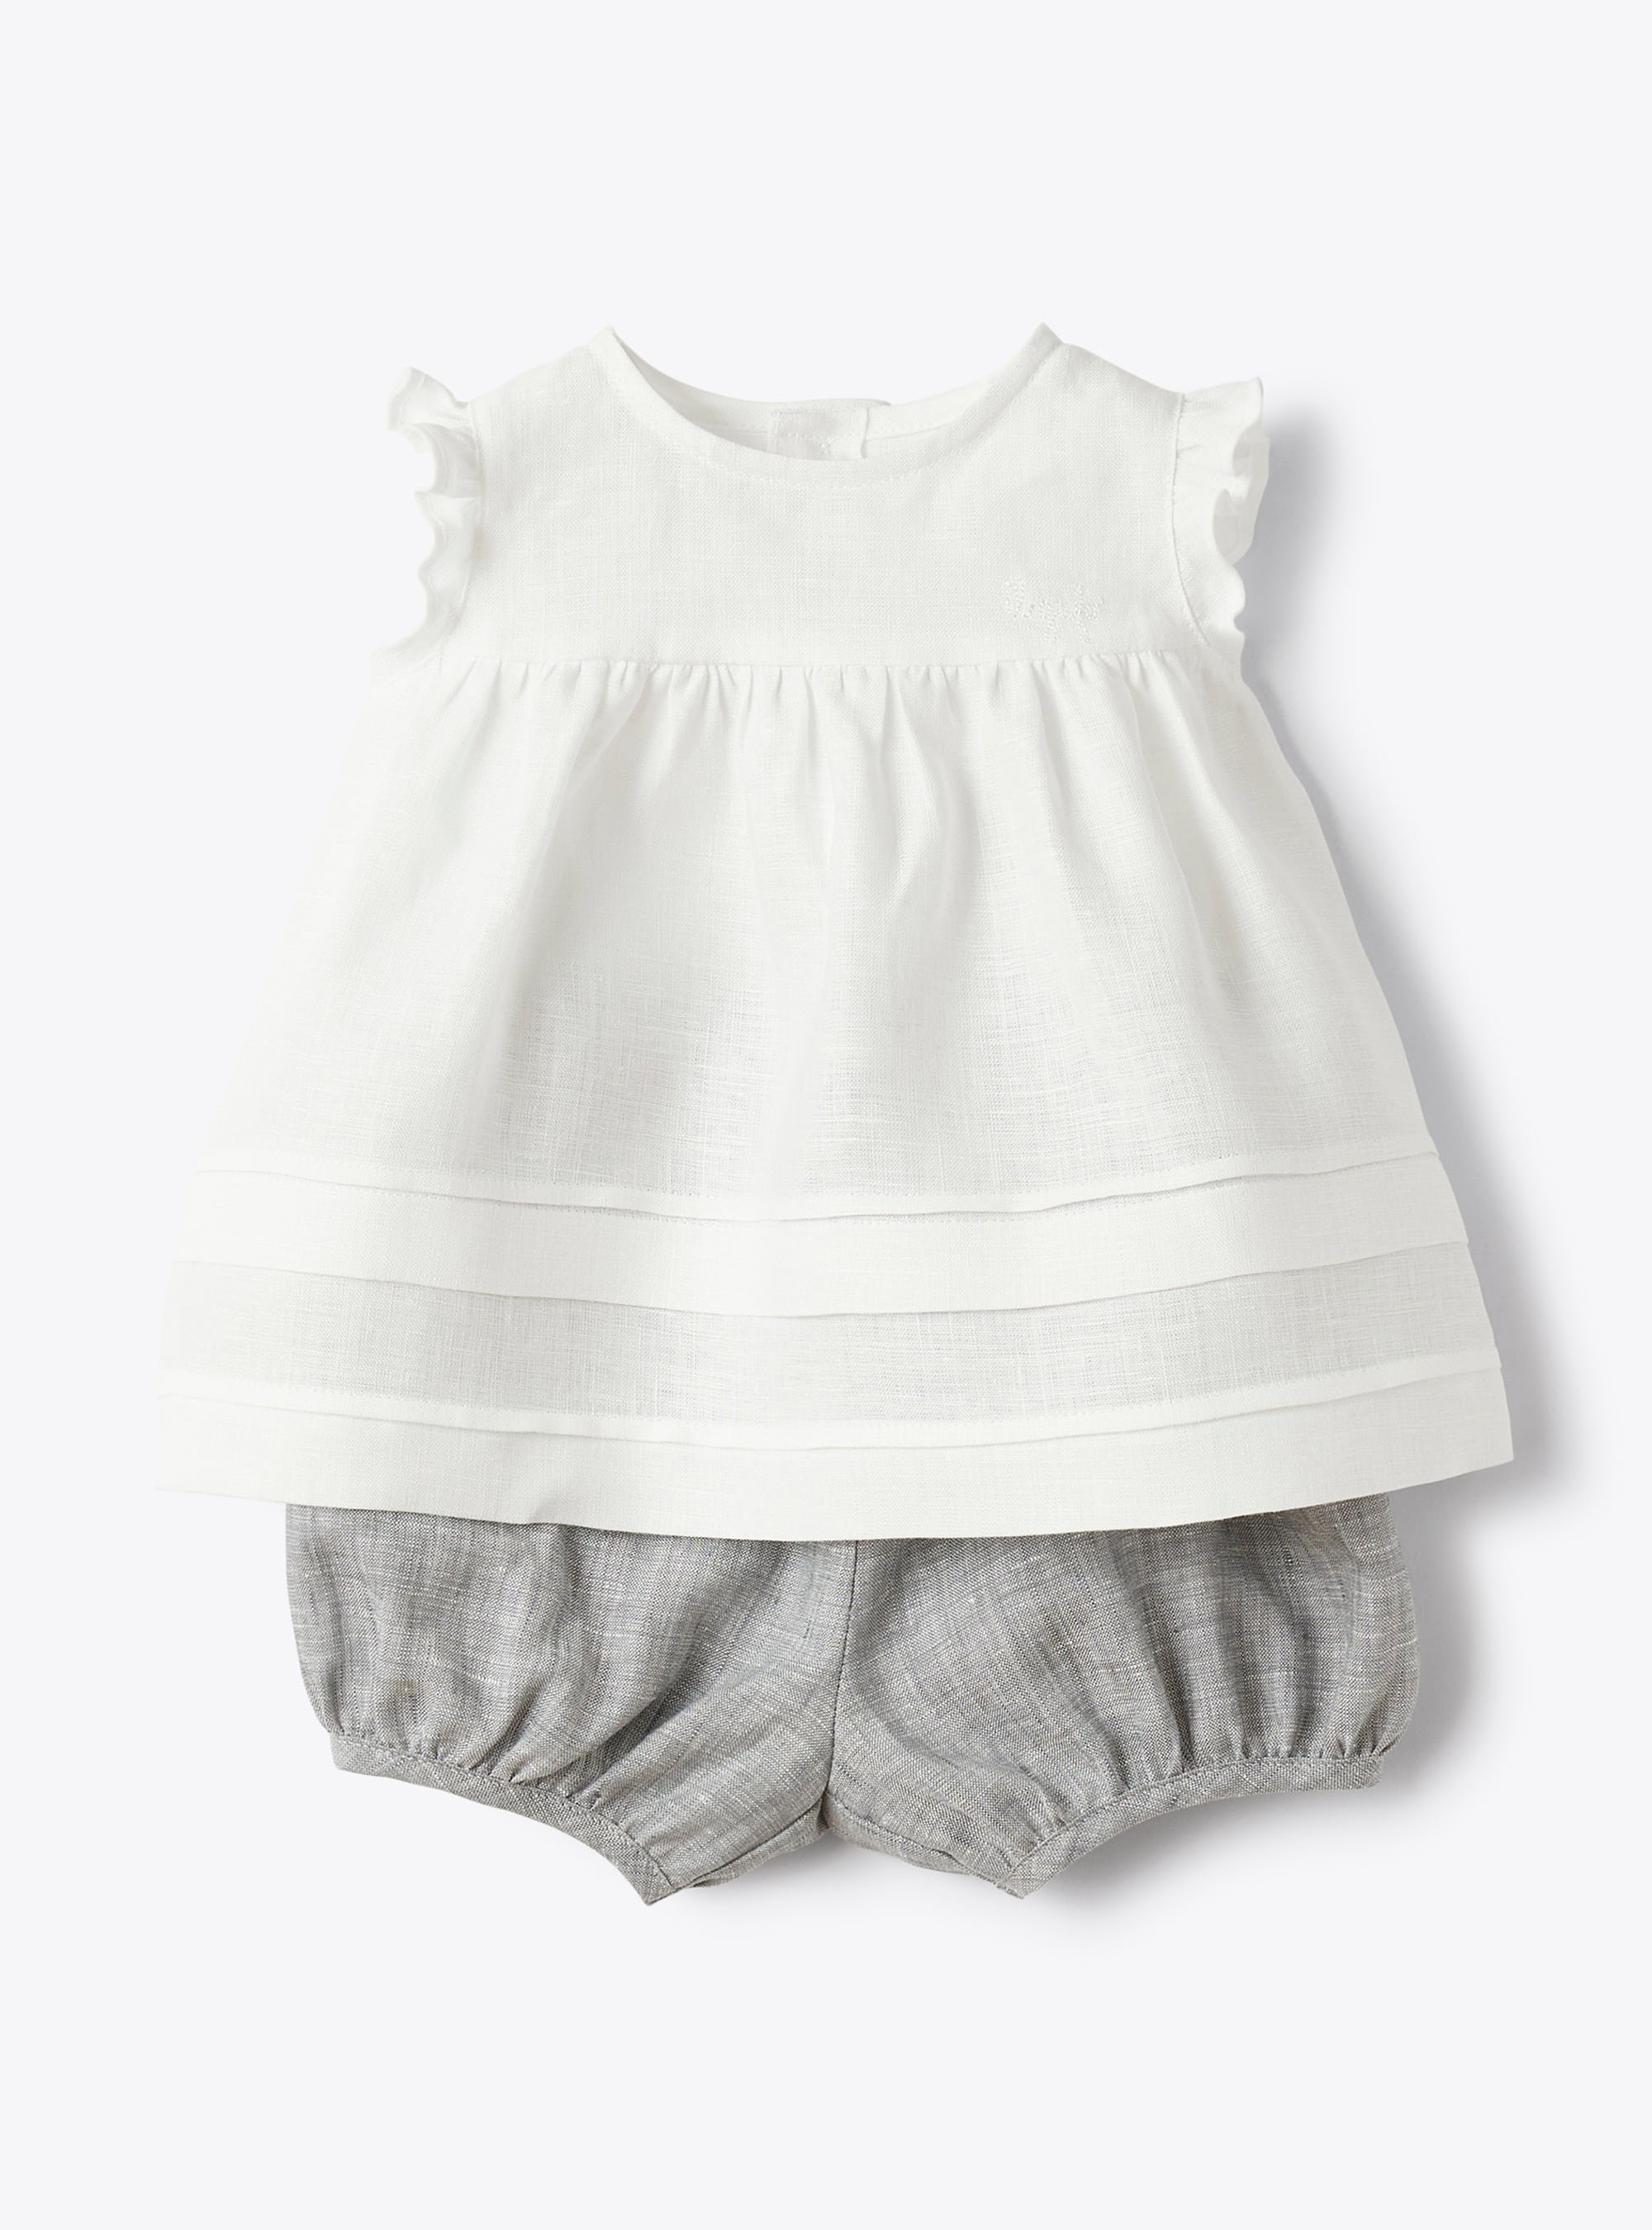 Two-piece set in linen for baby girls - COMPLETO DUE PEZZI - Il Gufo